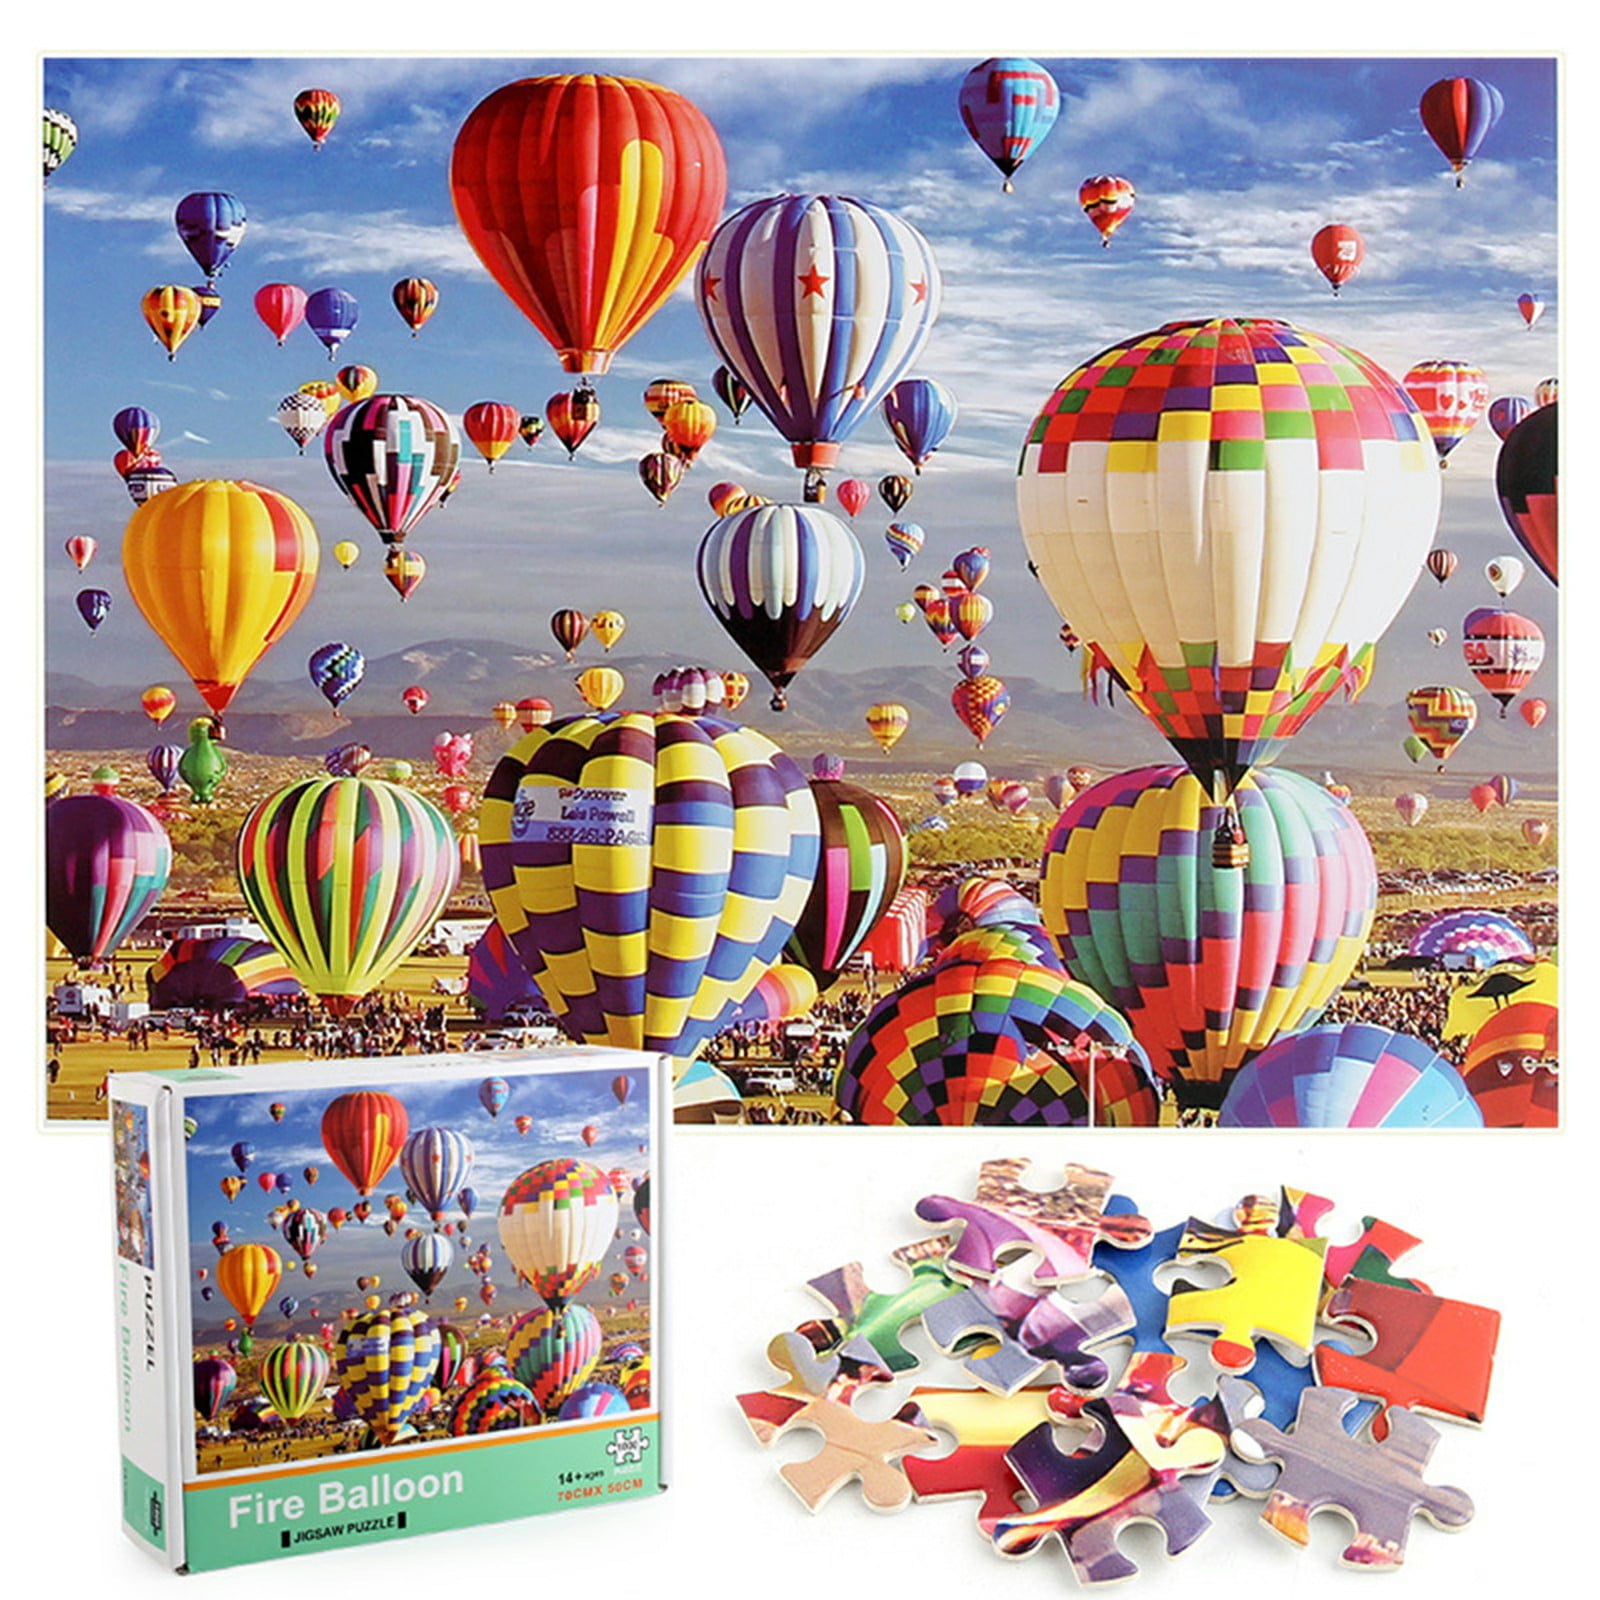 Details about   1000 Pieces 40*30 cm Jigsaw Puzzles Educational training Toys for Kids Adult NEW 